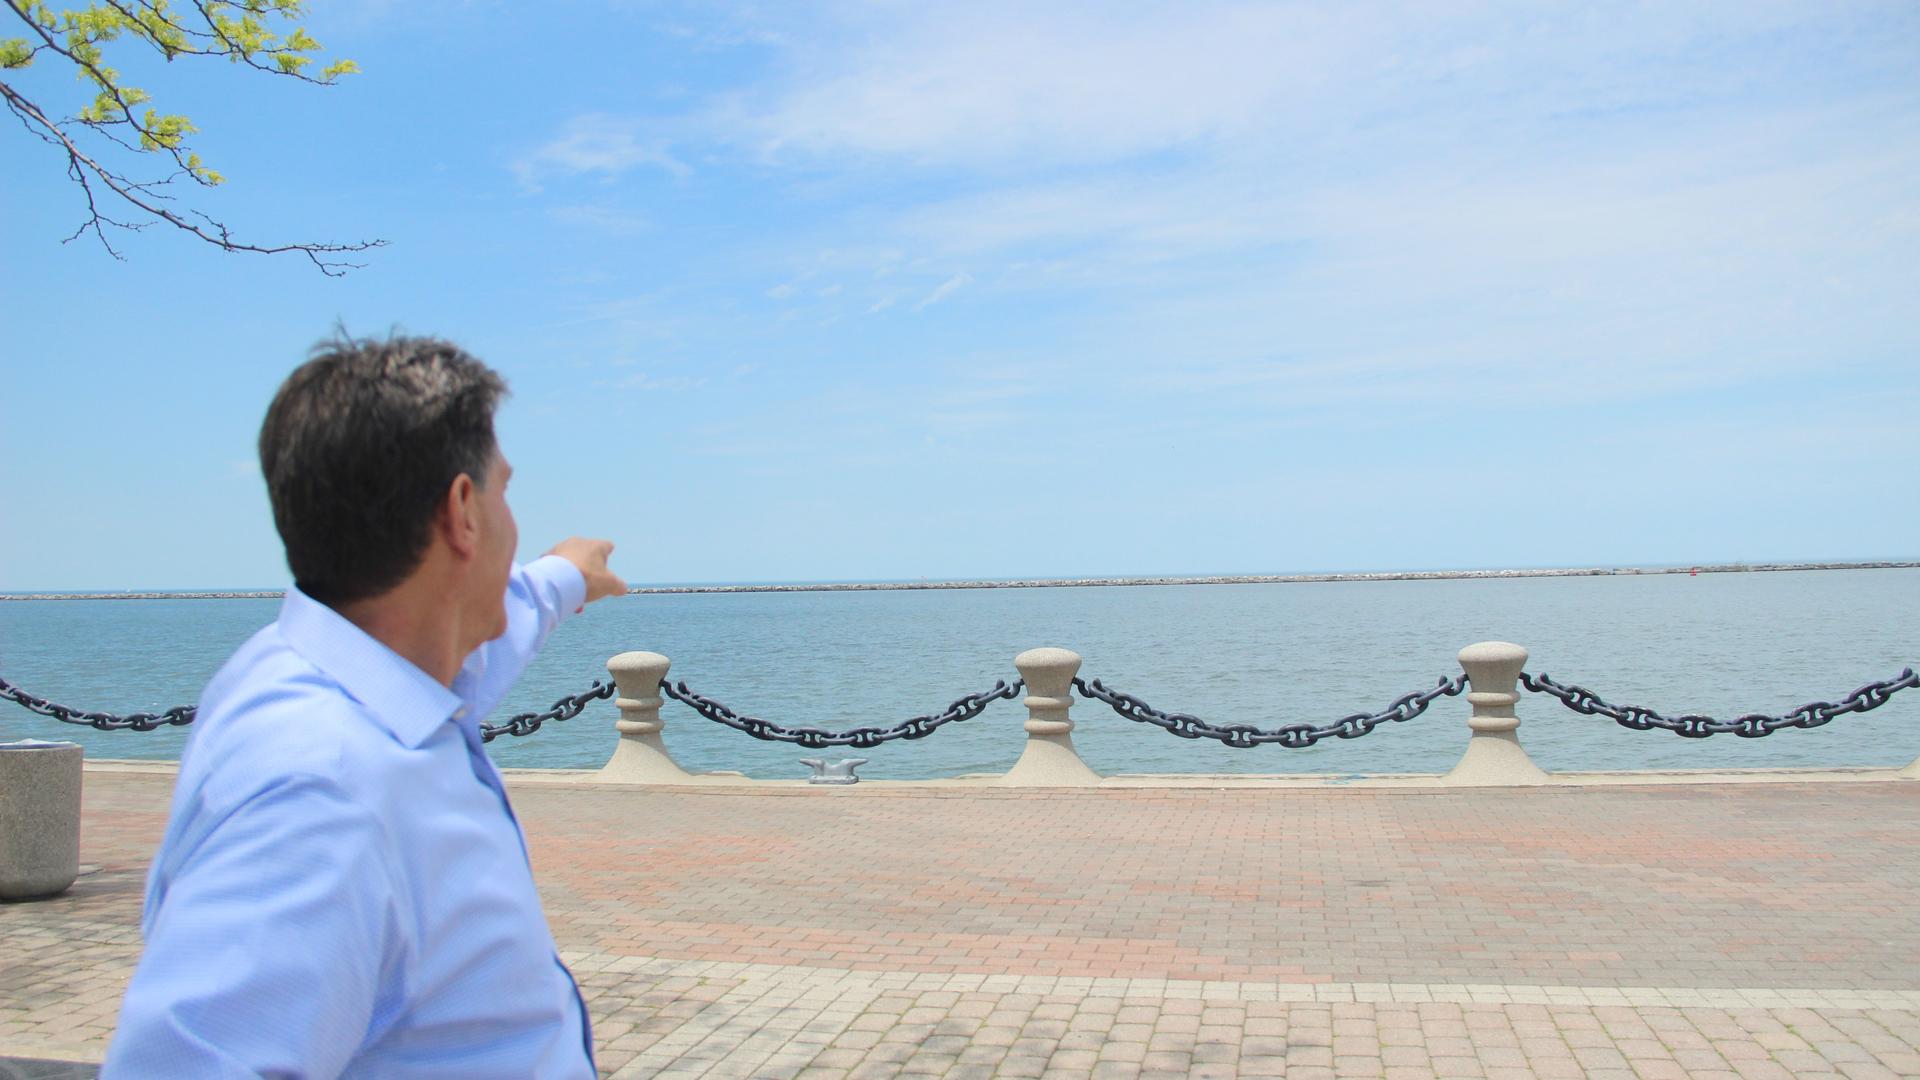 Lorry Wagner, president of LEEDCo points out toward Lake Erie where the world’s first freshwater offshore wind farm, six turbines, will soon be built.